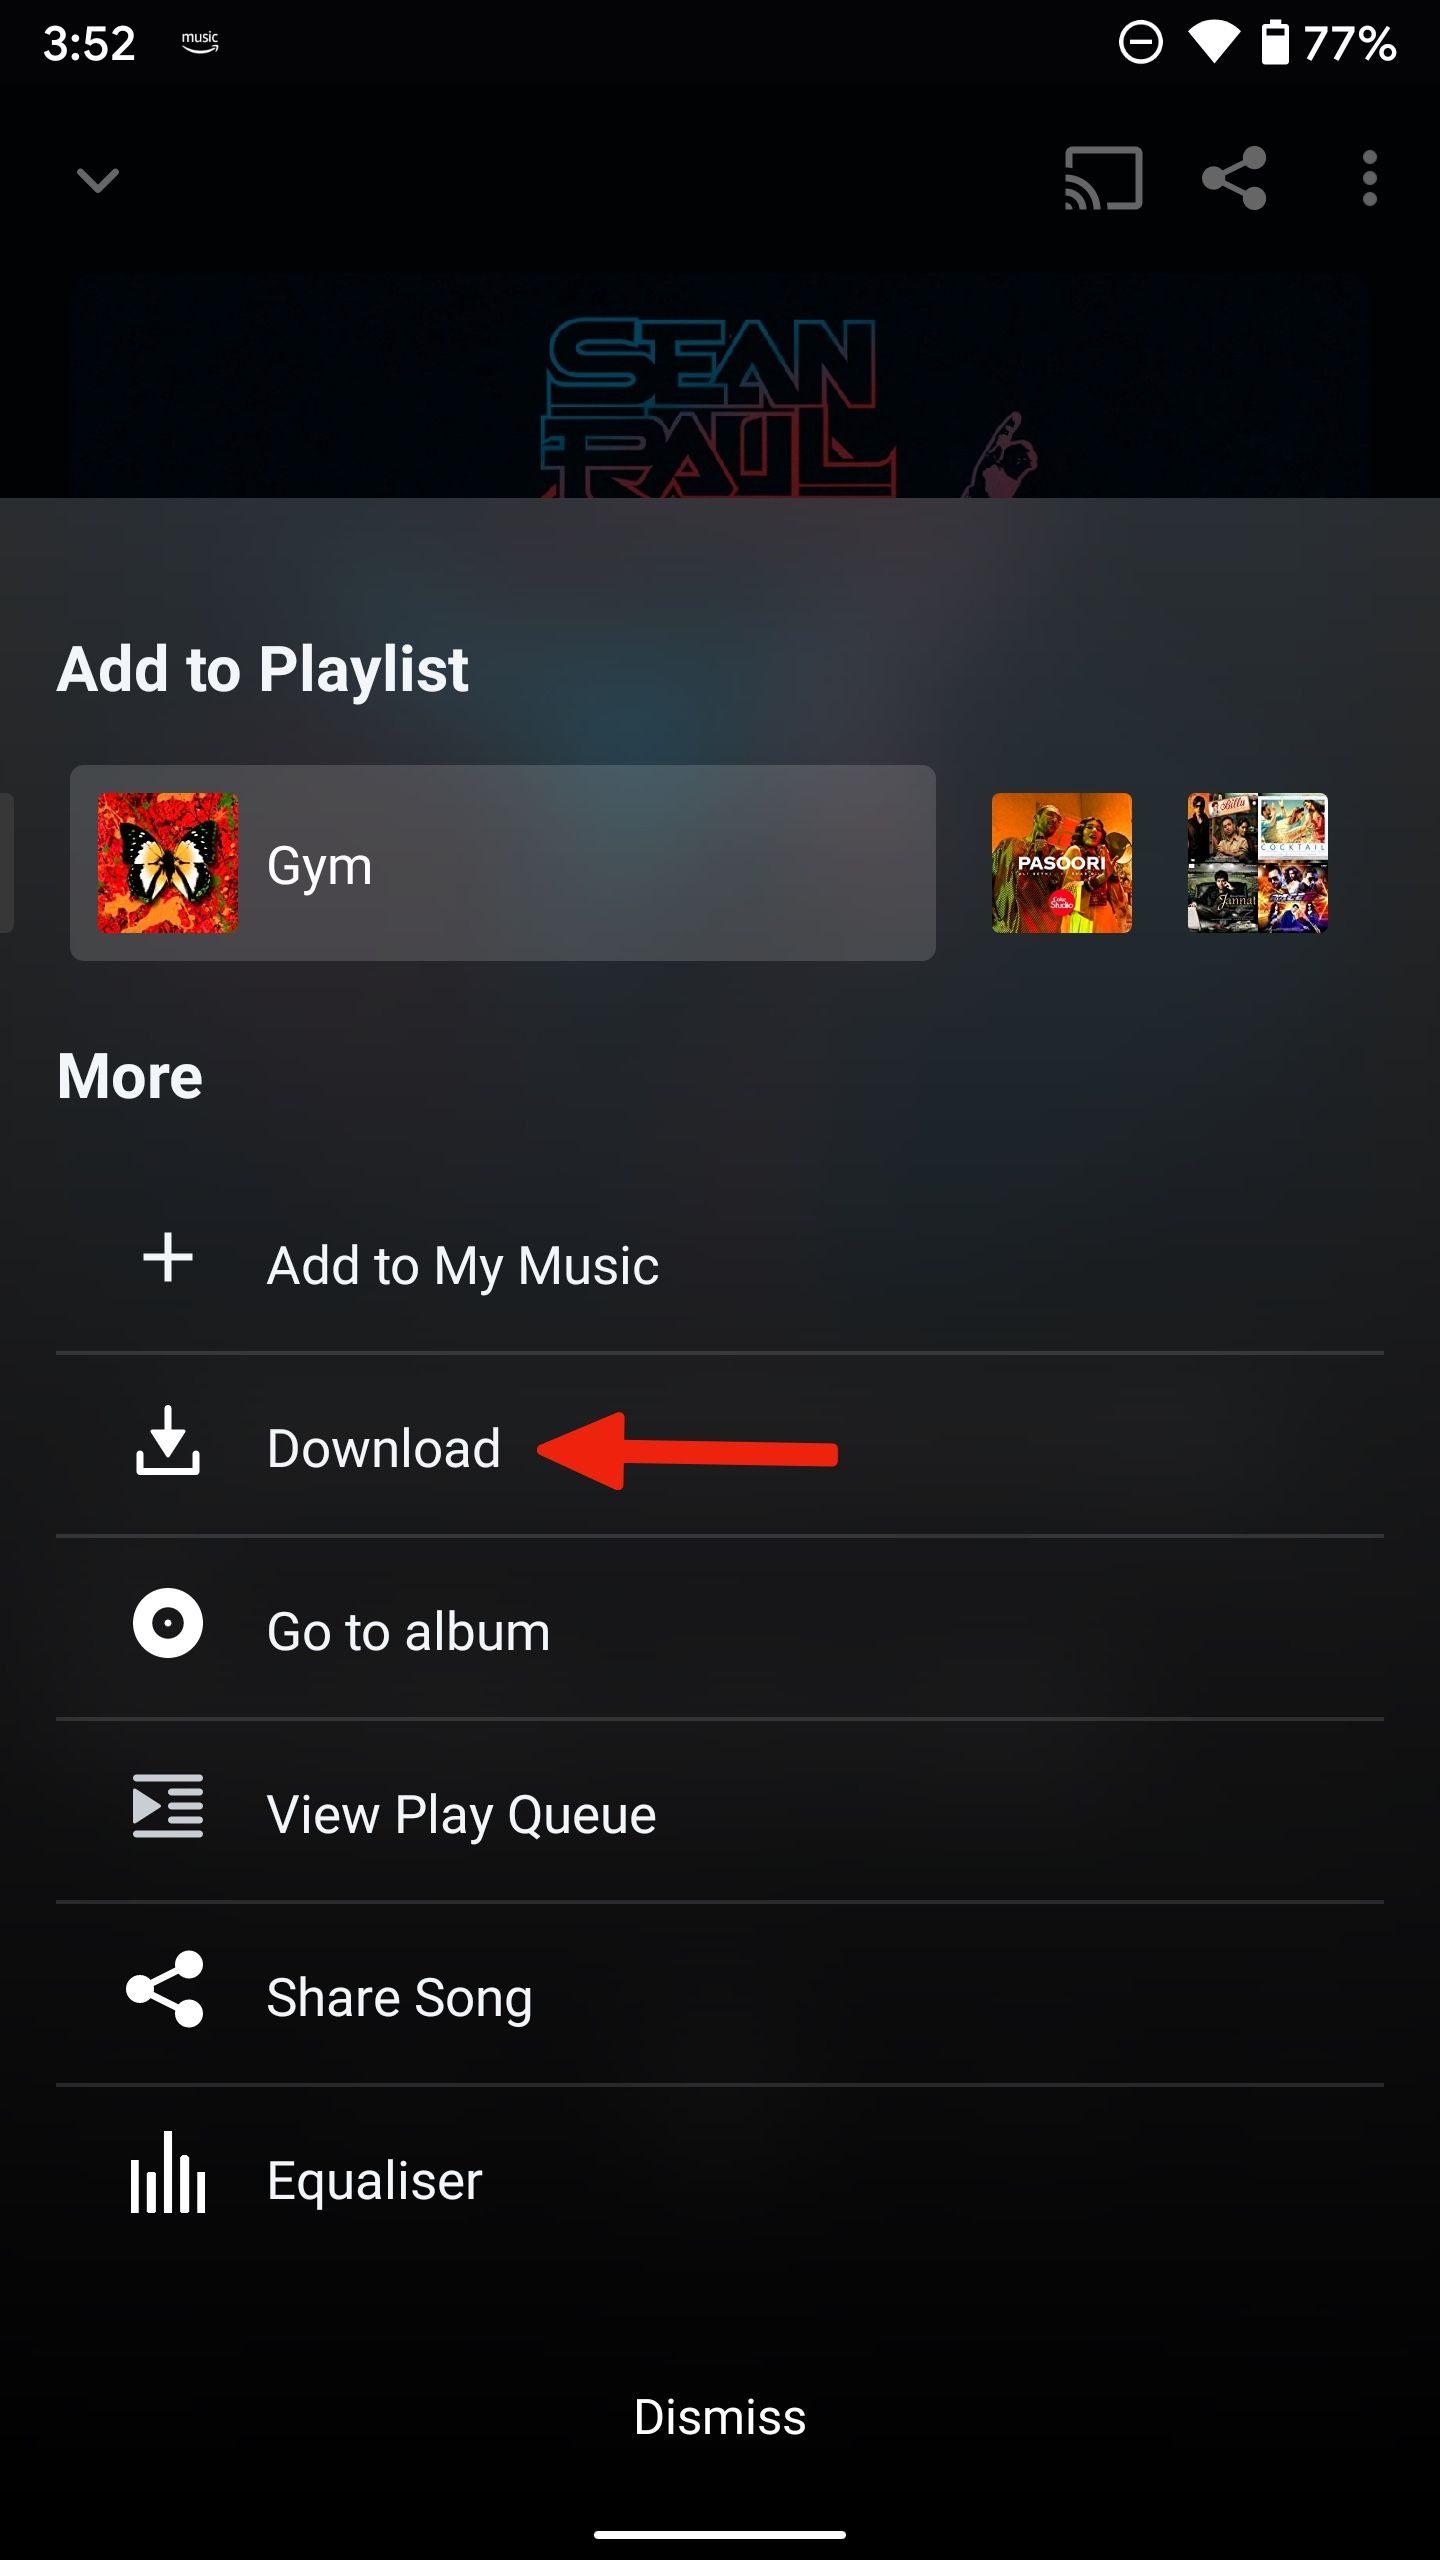 Options popup for a specific song with an arrow pointing to the 'Download' option.